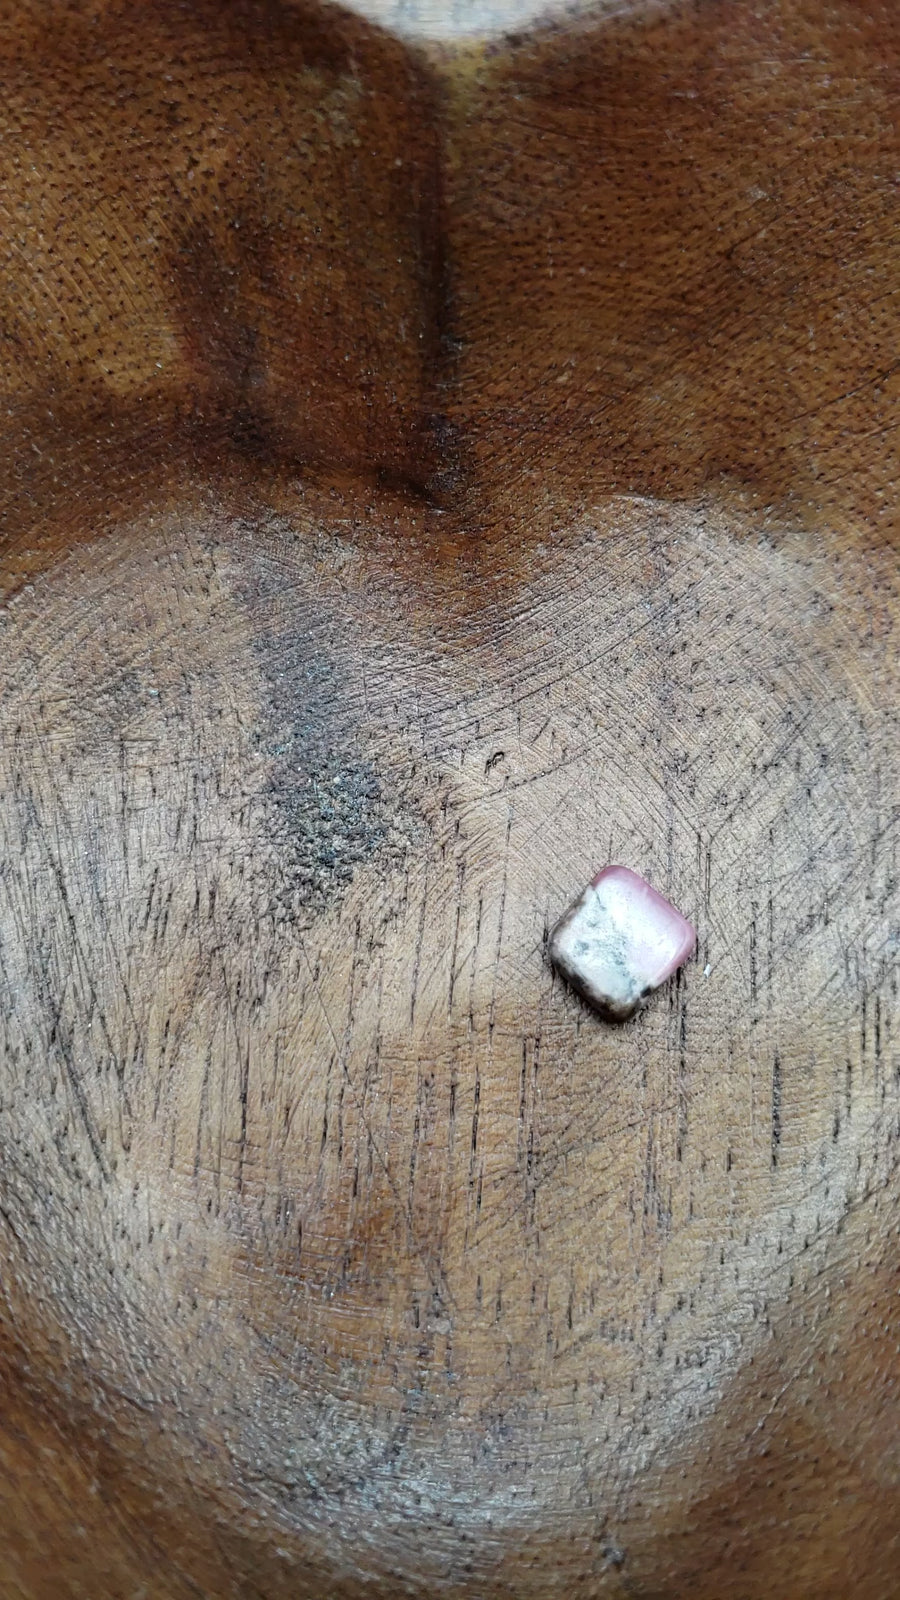 Video of rhodonite chips being poured into a bowl